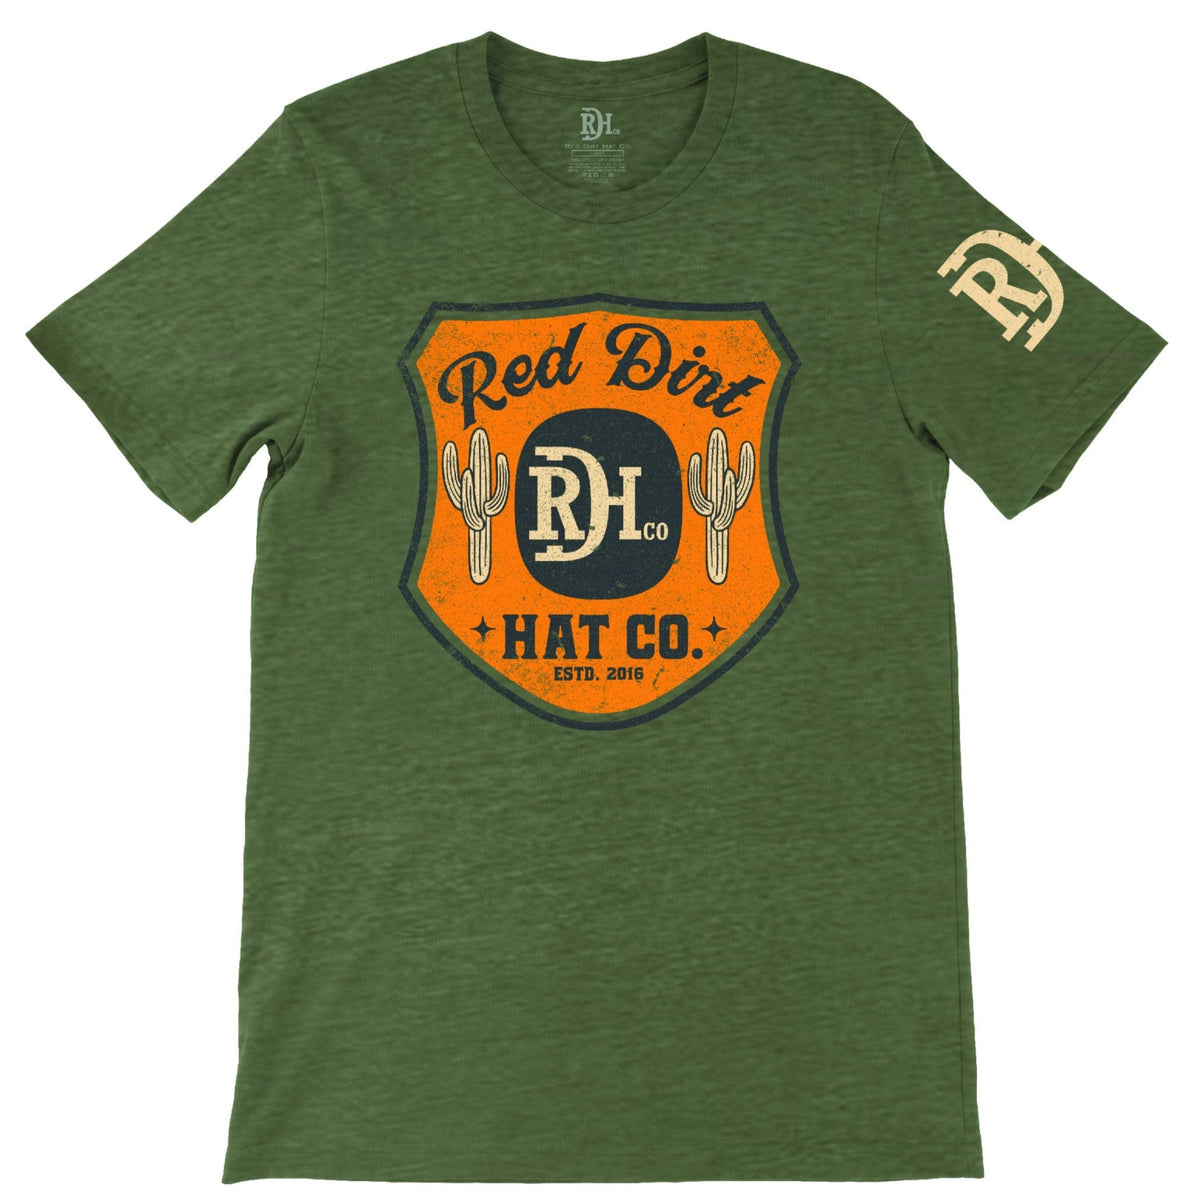 Red Dirt Hat Co. "Buffalo Badge" T-Shirt in Heather Olive